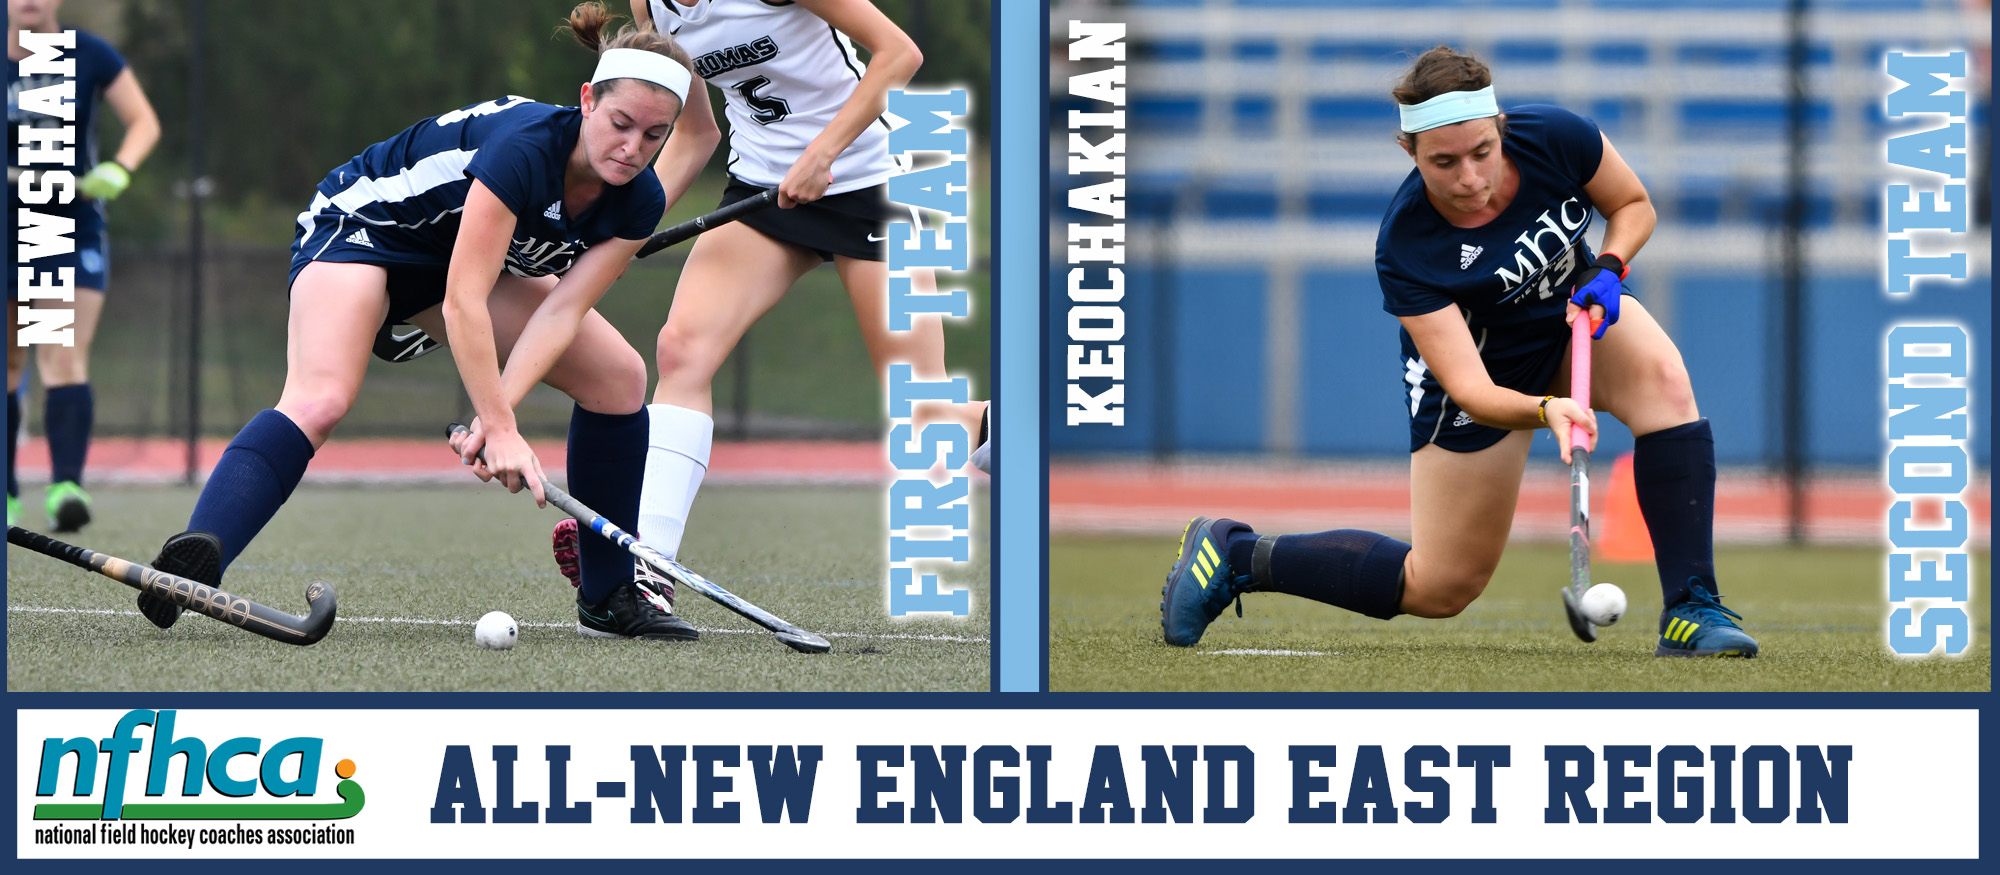 Graphic promoting the 2018 All-Region Field Hockey selections, Colby Newsham and Mirjam Keochakian